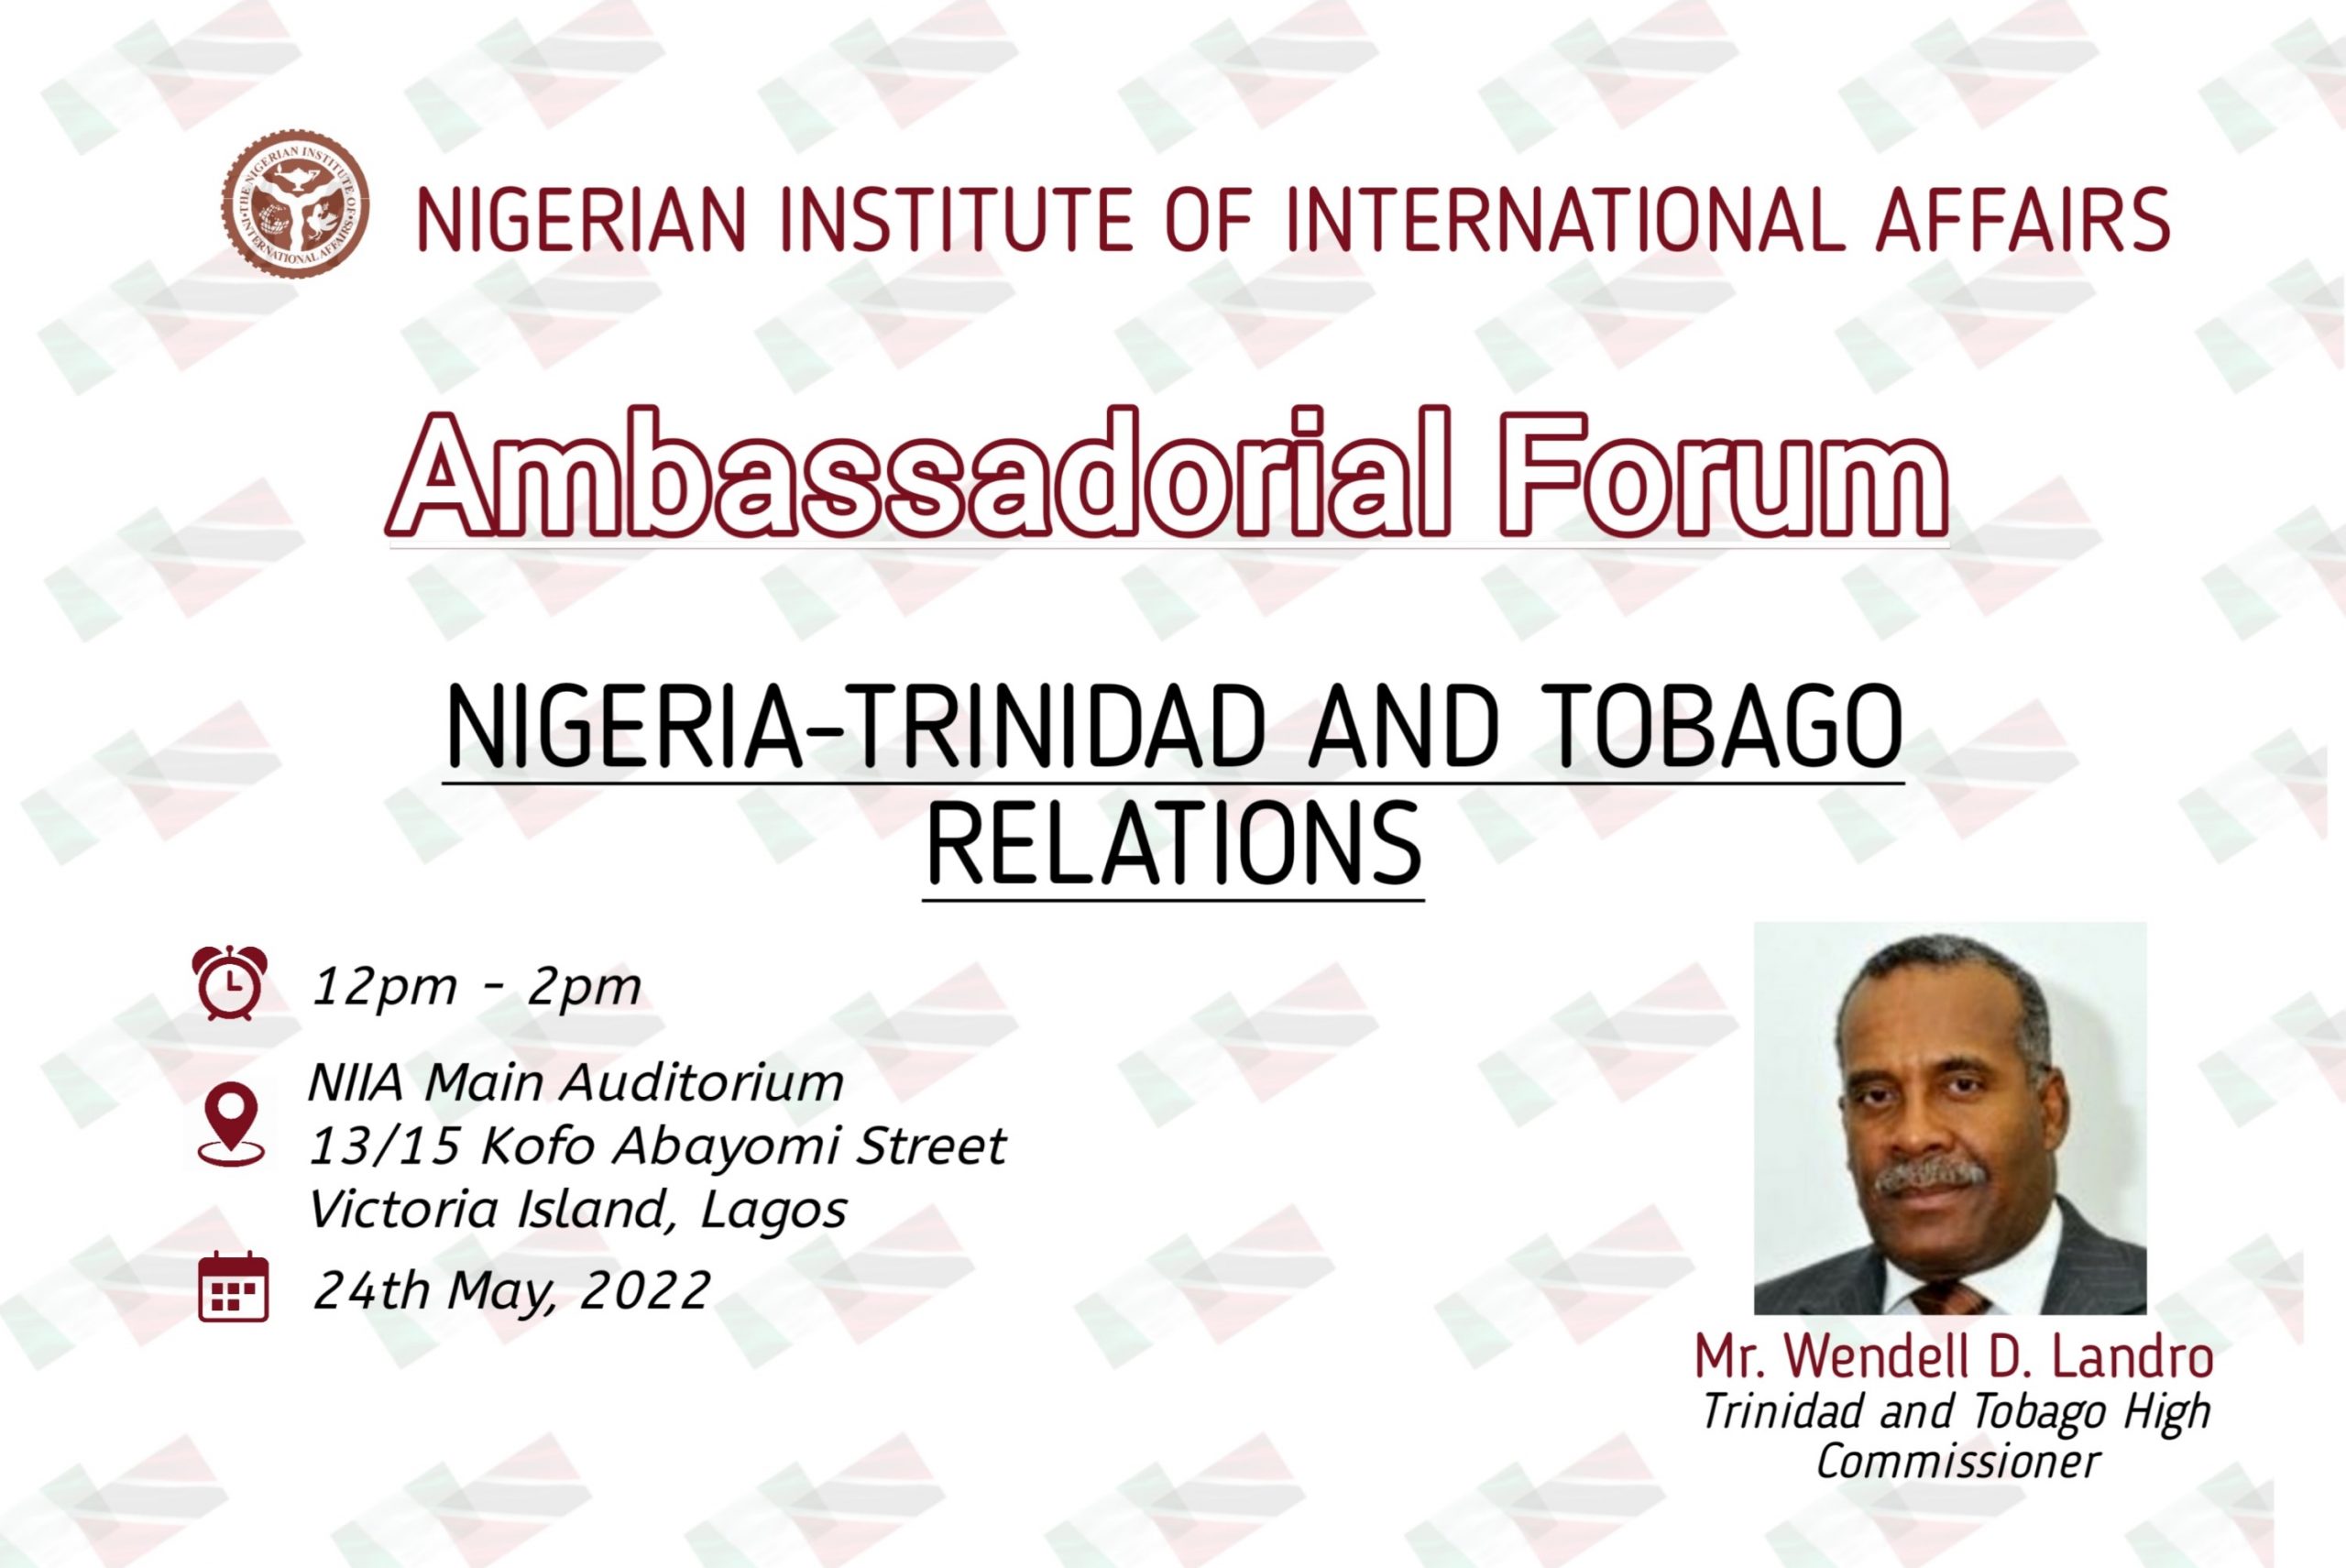 NIIA Dialogue Series Turns On A Significant Other, the Republic of Trinidad and Tobago